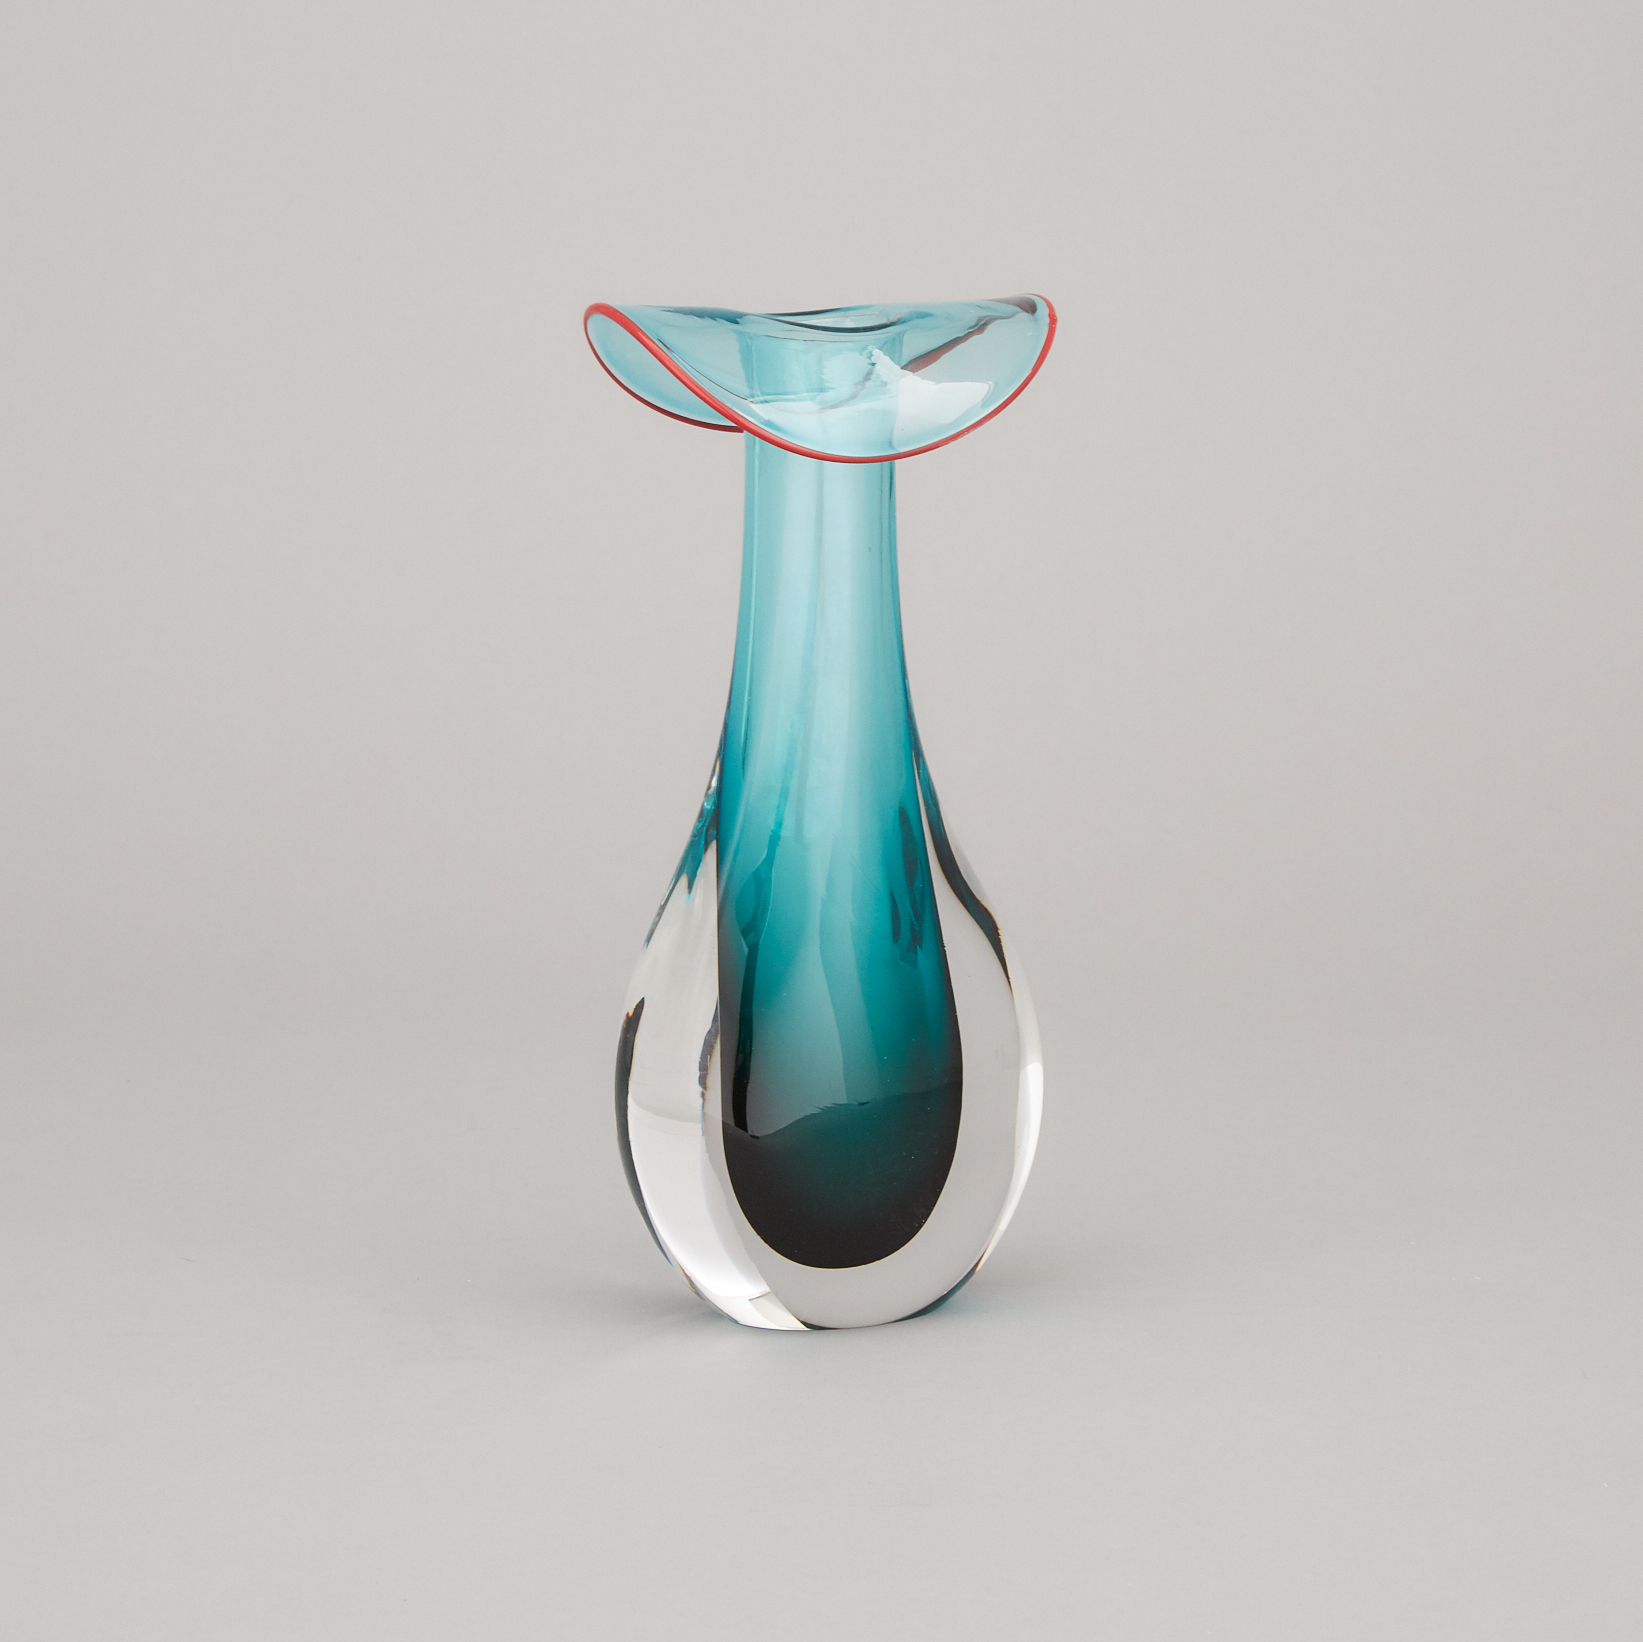 Toan Klein (American/Canadian, b.1949), Blue Green Glass Vase with Red Lip, 1995